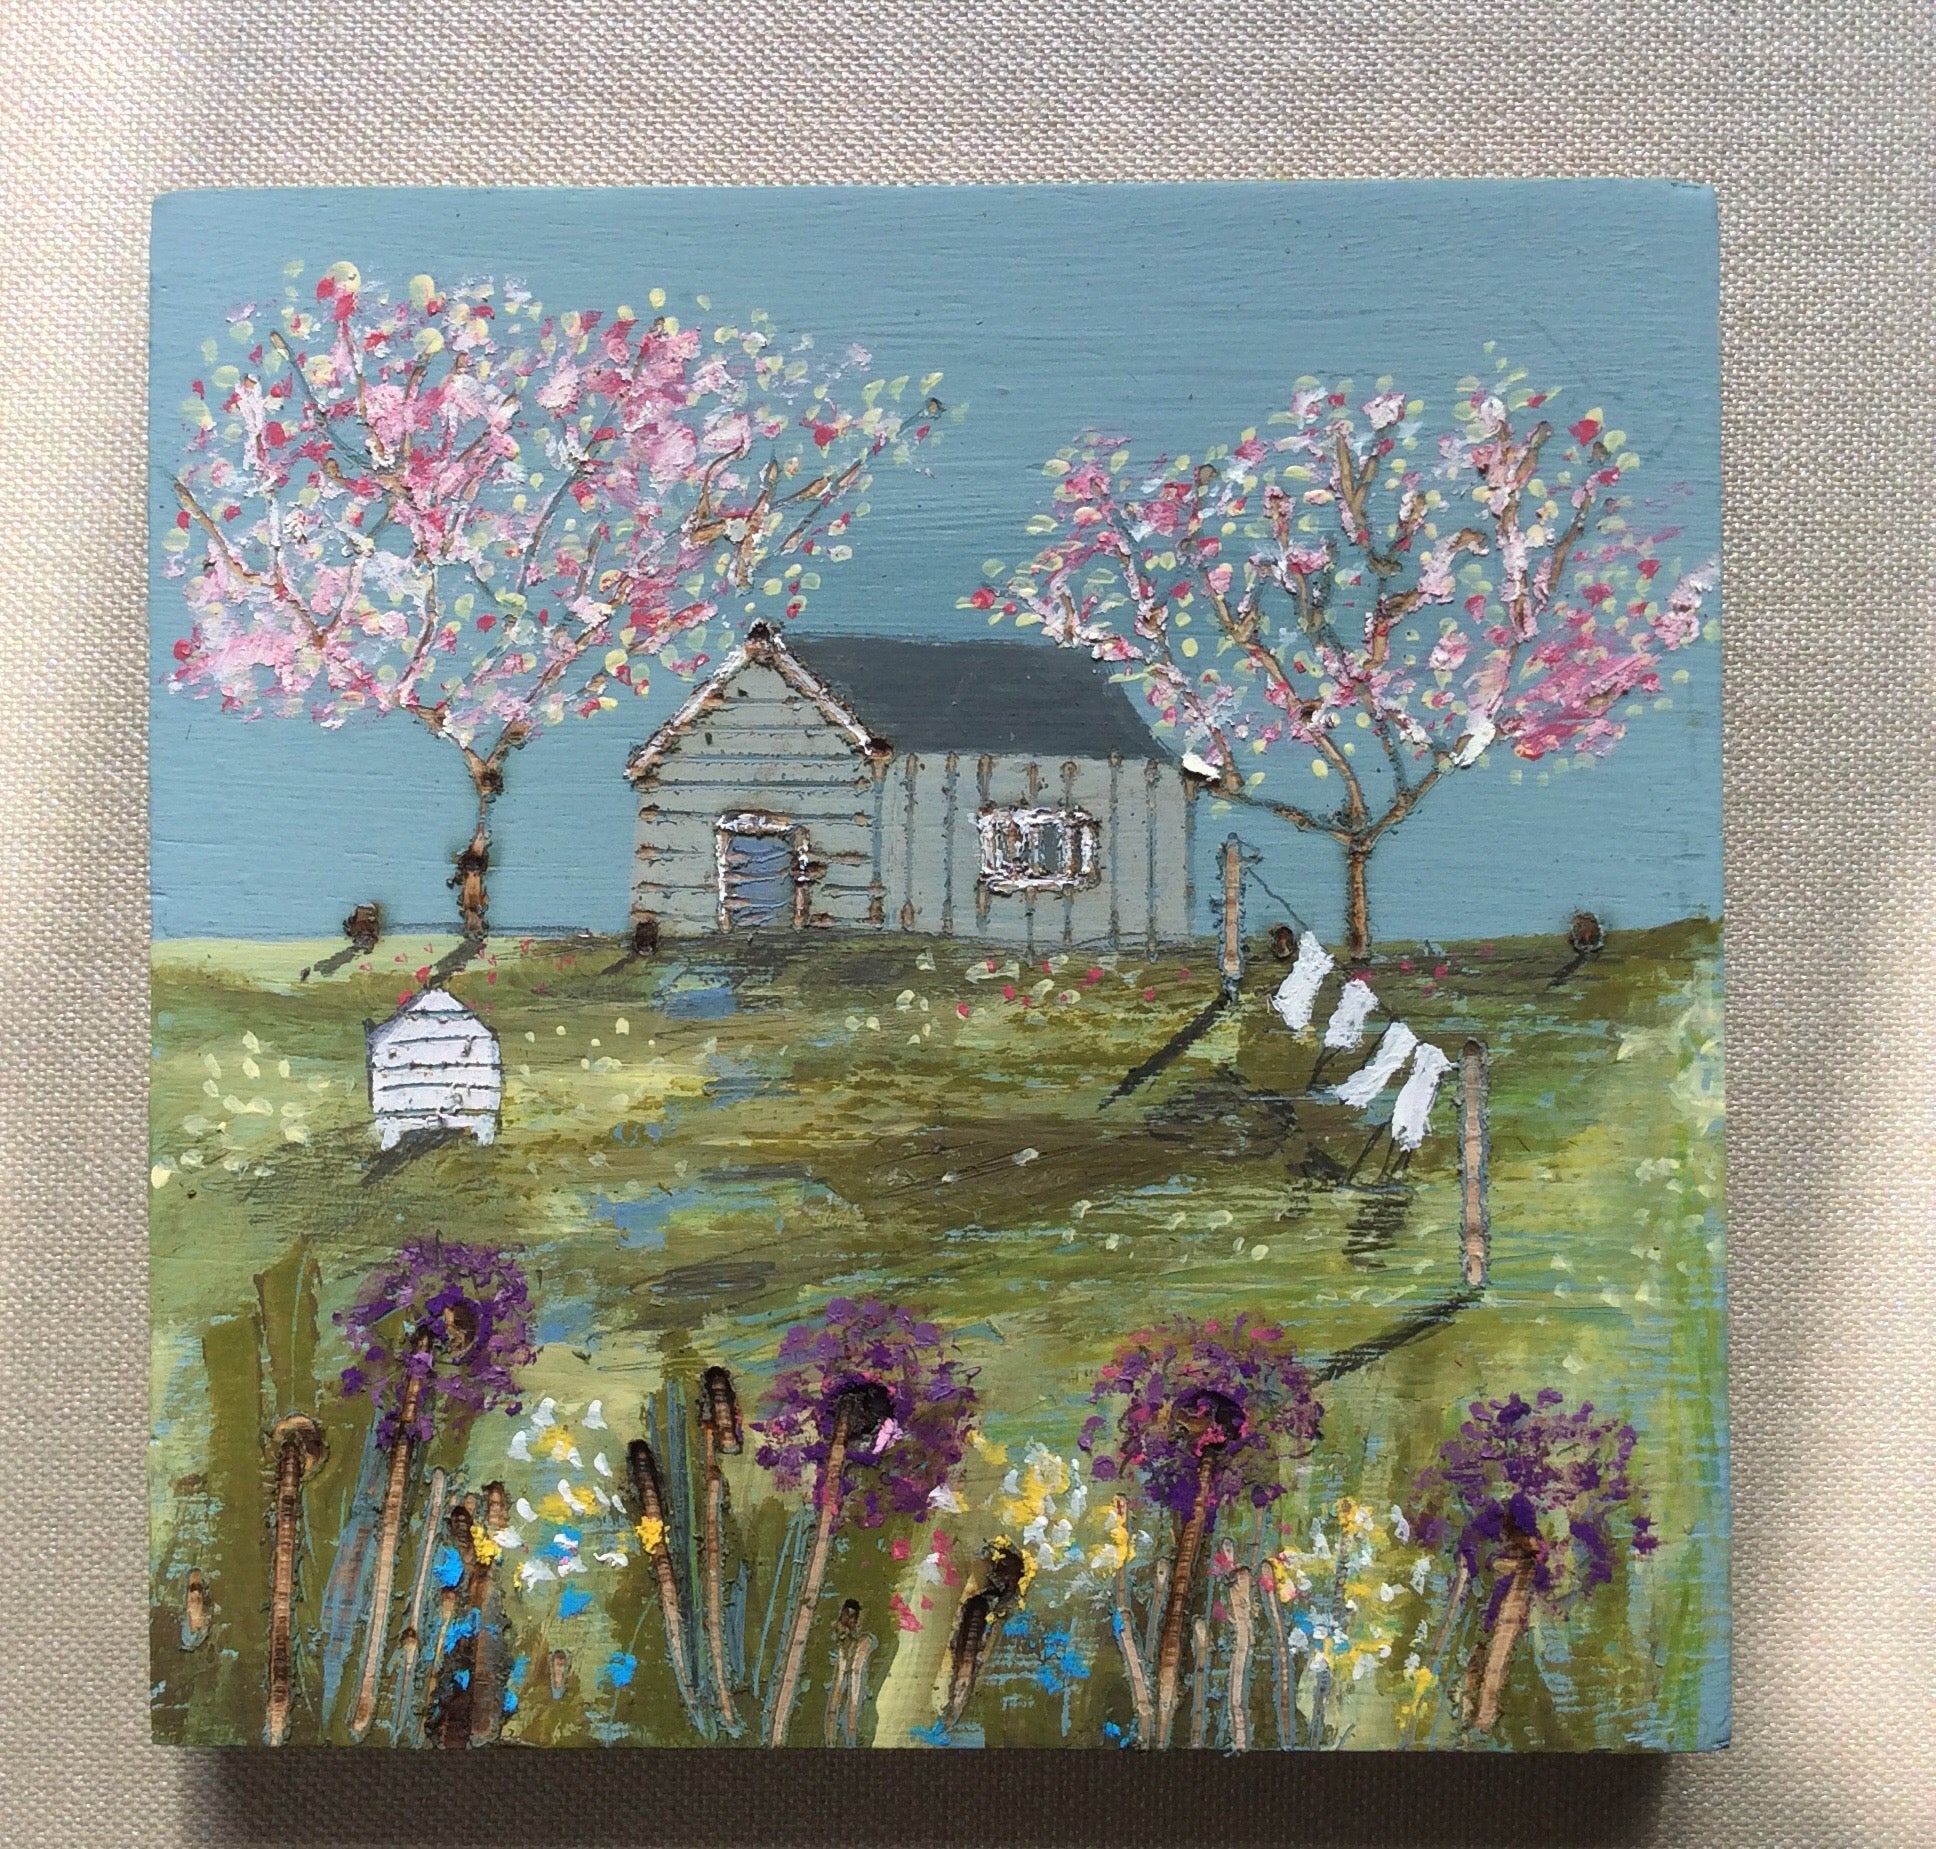 Mixed Media Art on wood By Louise O'Hara - "A perfect day”